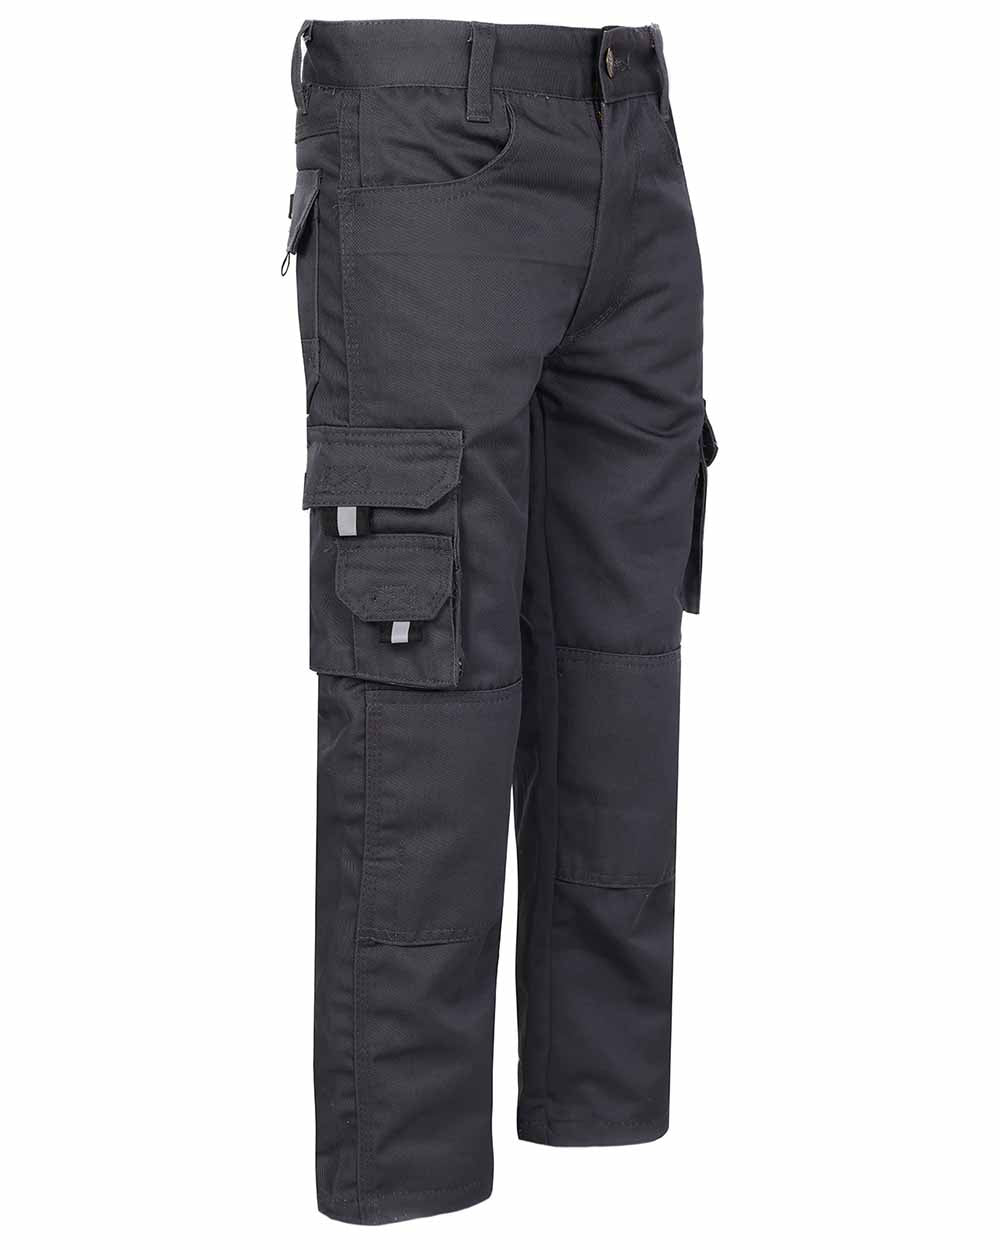 Side view showing cargo pockets TuffStuff Junior Pro Work Trousers in Grey 